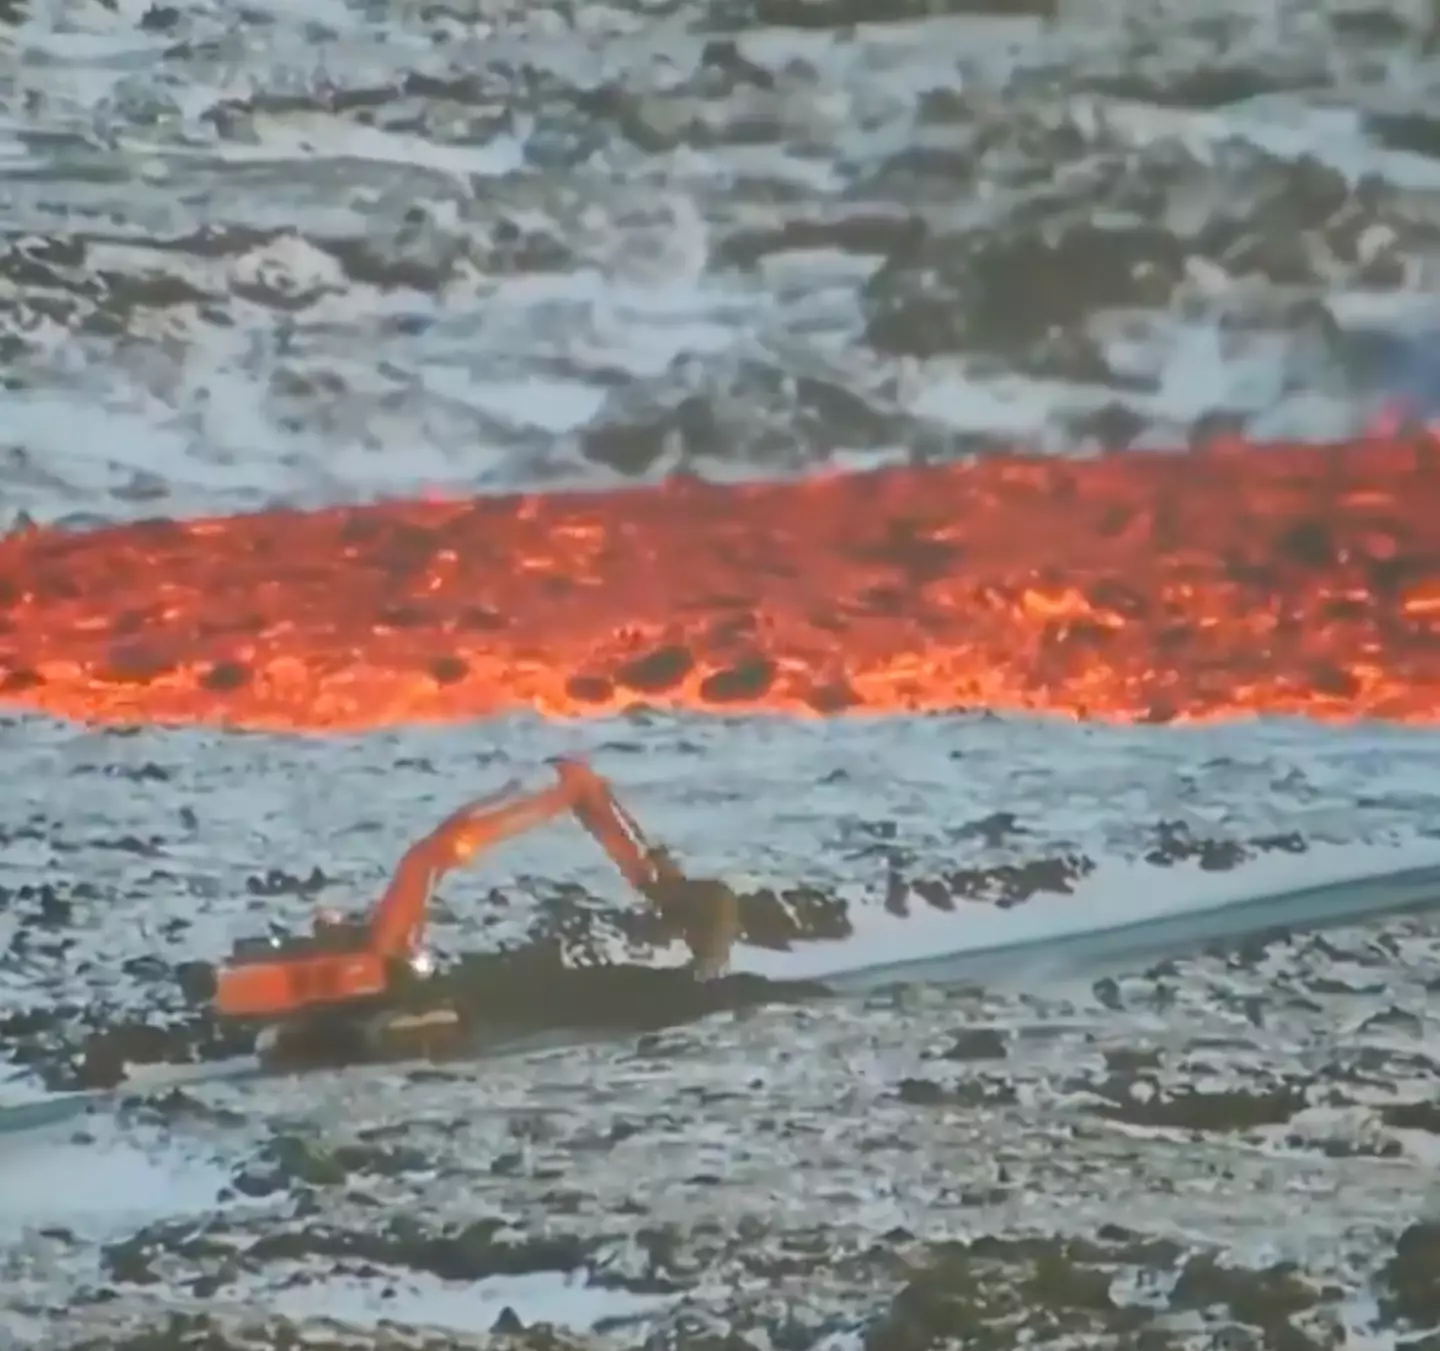 Eruptions have become a common occurrence in Iceland in recent months. (YouTube/@liveiceland)